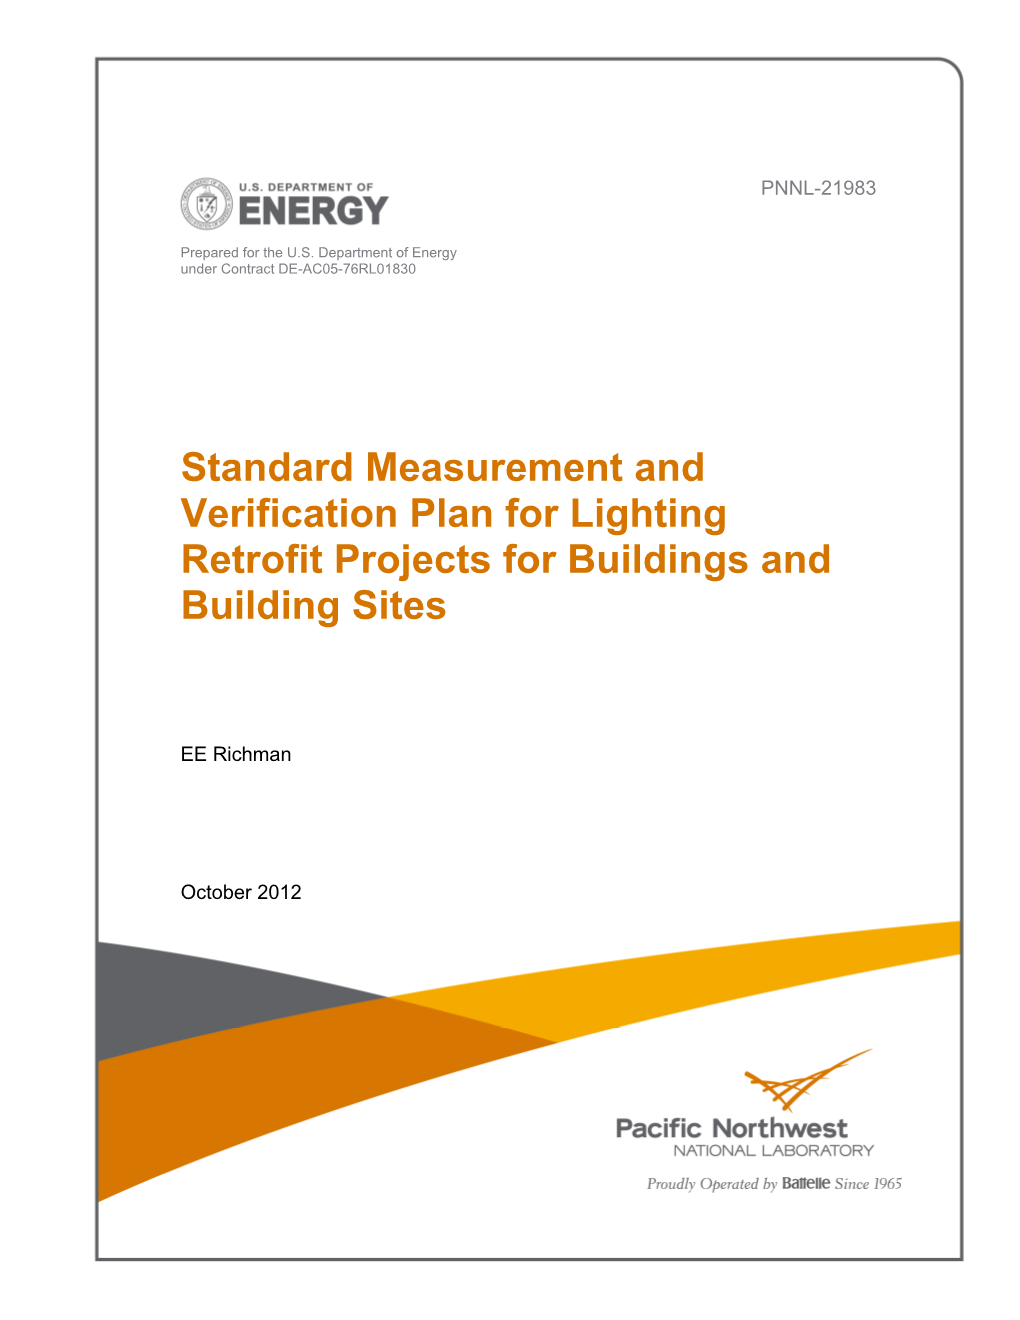 Standard Measurement and Verification Plan for Lighting Retrofit Projects for Buildings and Building Sites